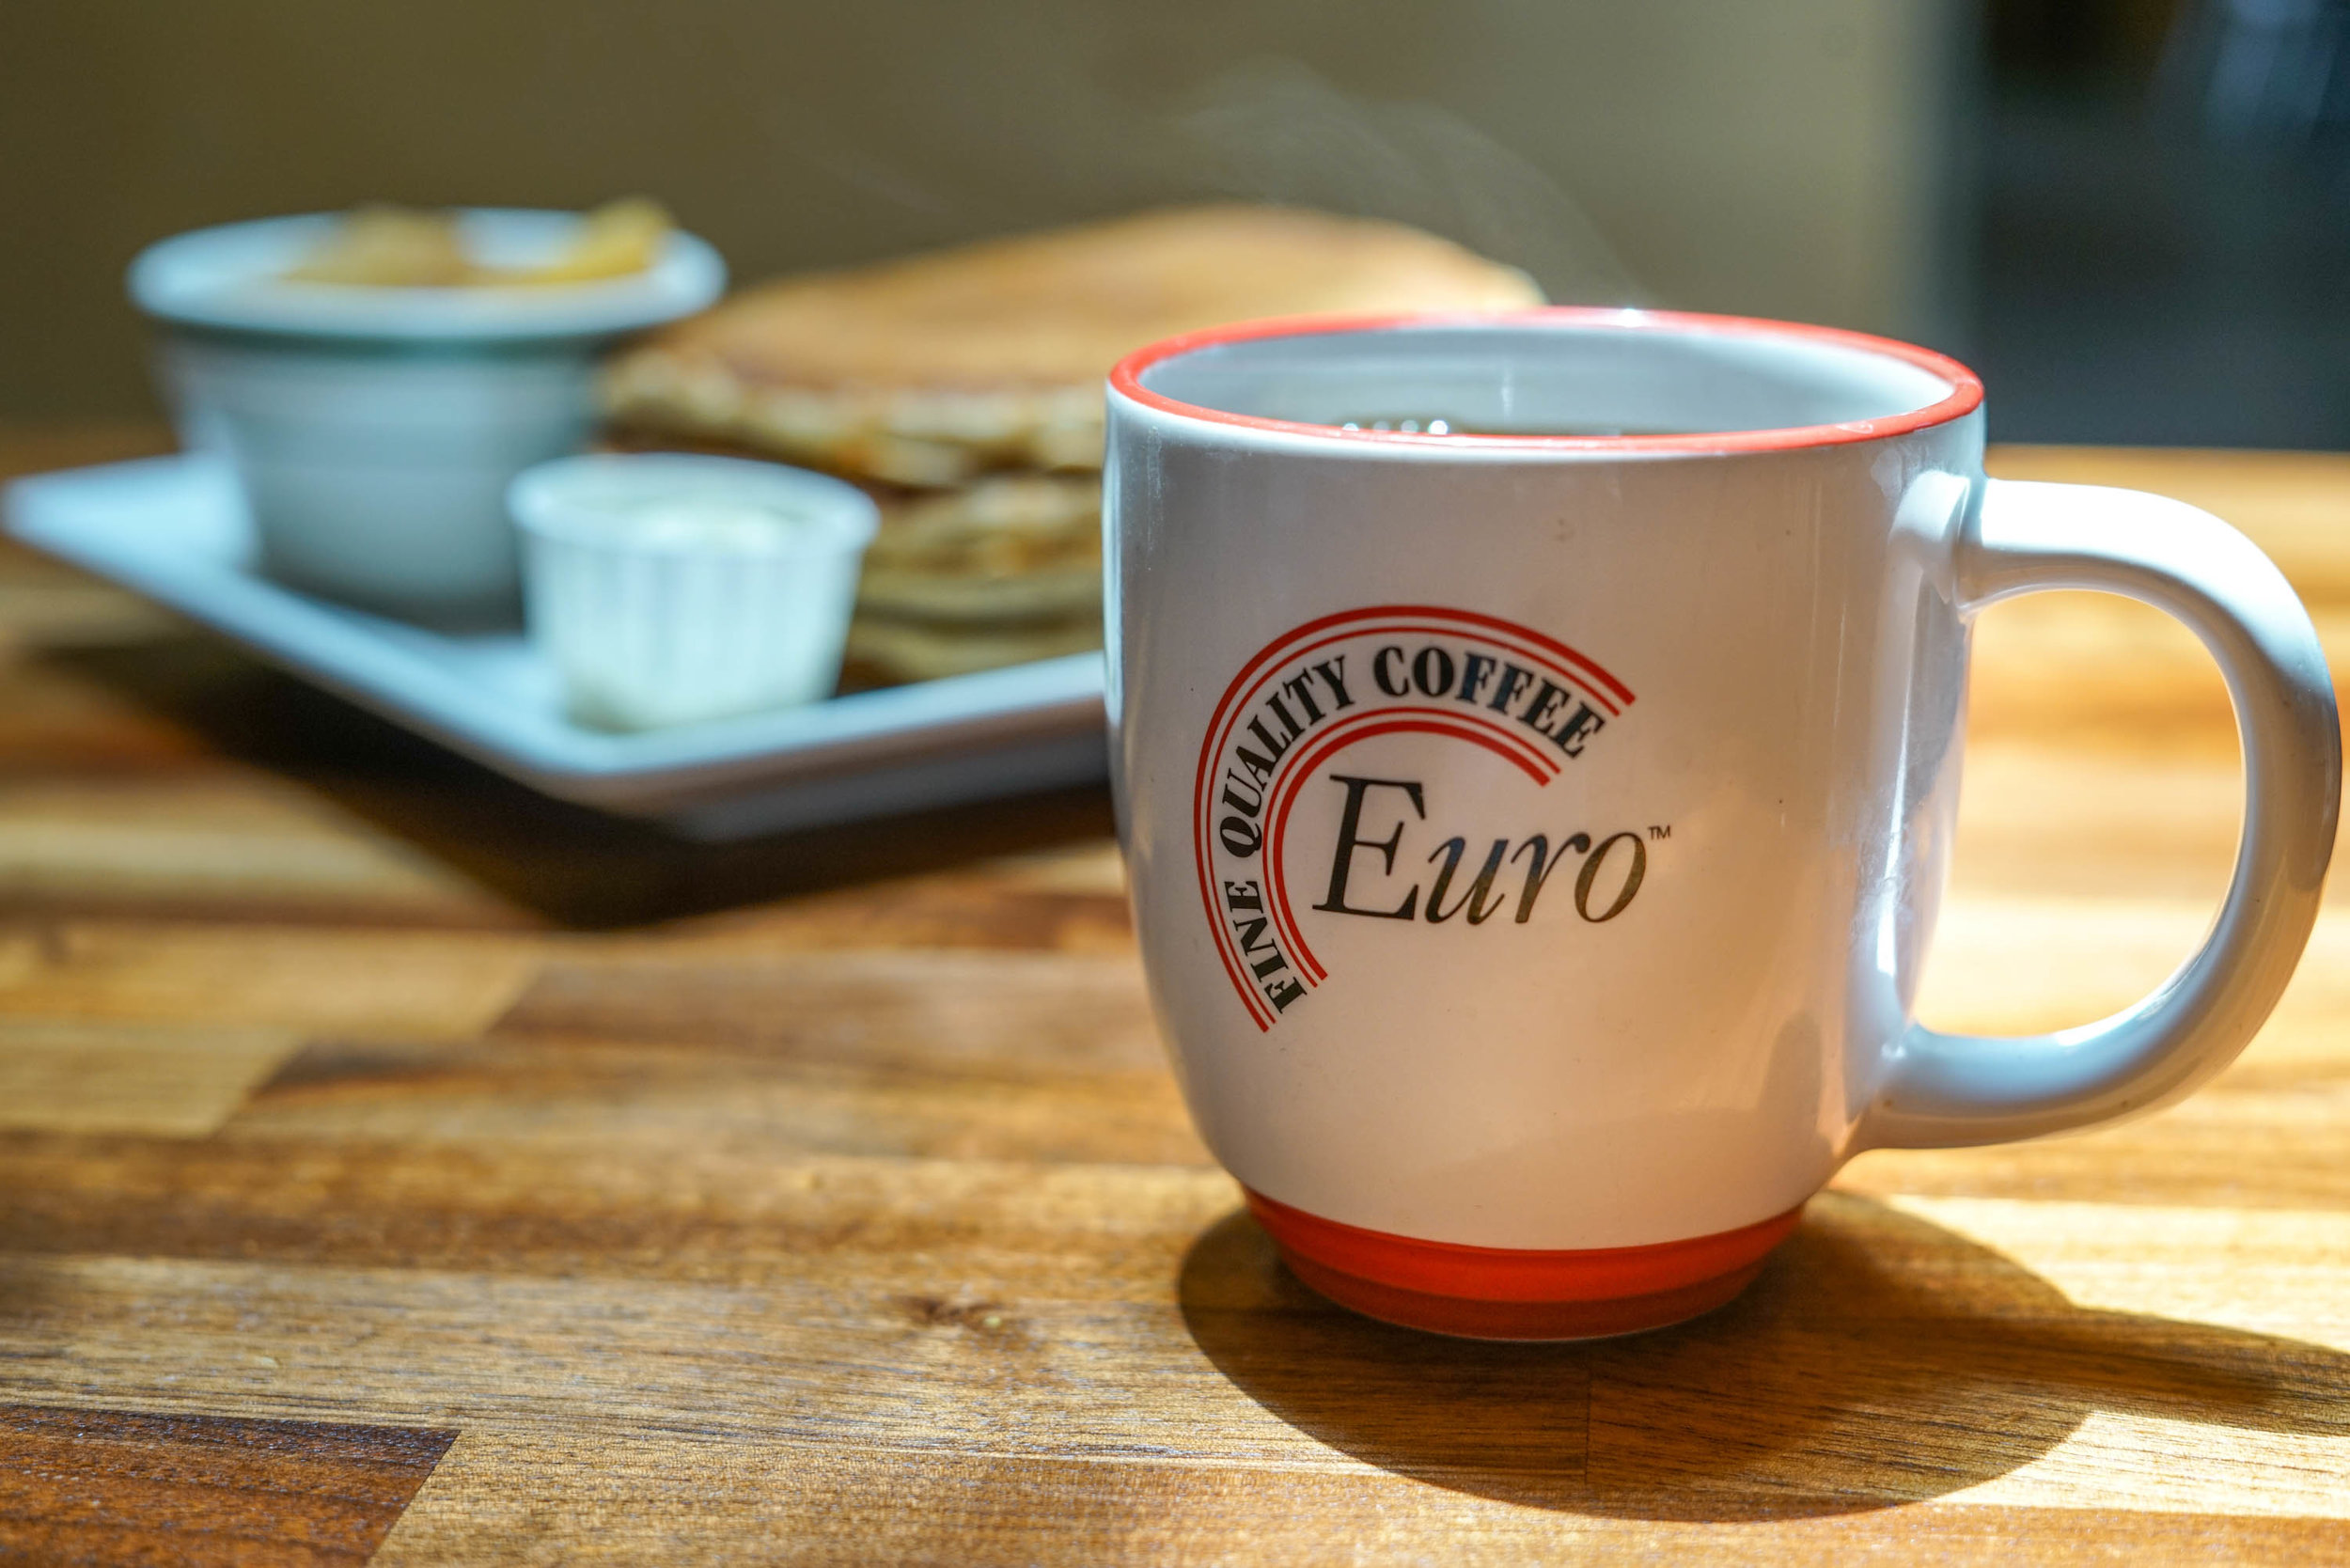  euro coffee cup with pancakes in the background 